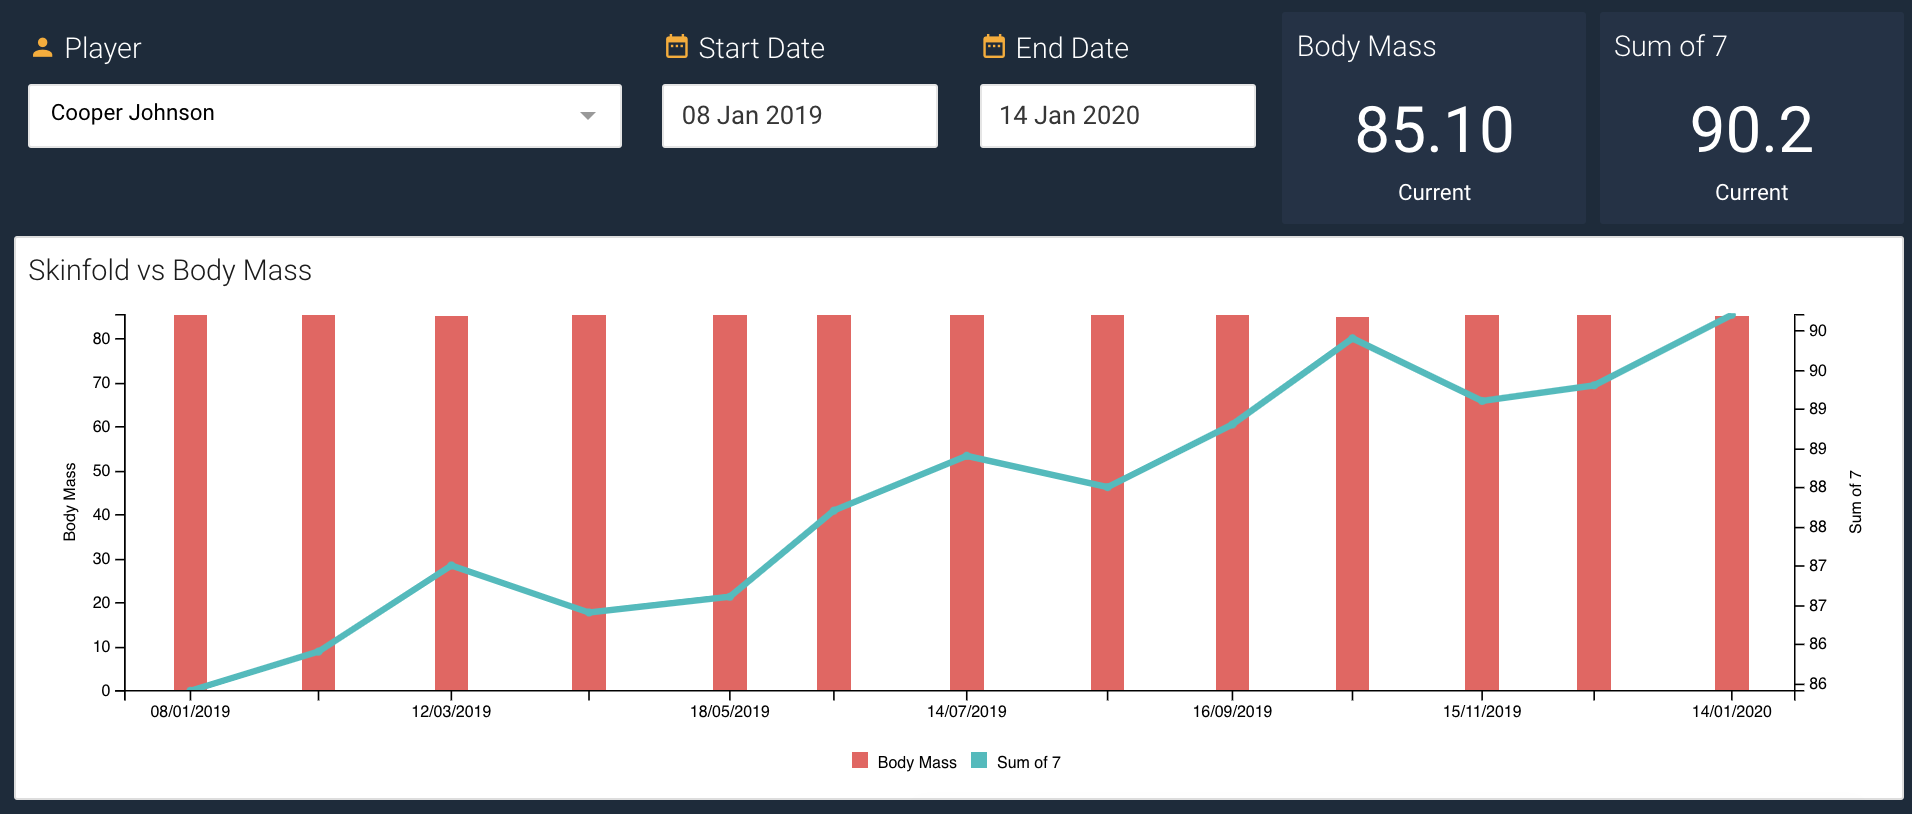 A screenshot showing an example of a time series chart built using the Smartabase Dashboard builder.